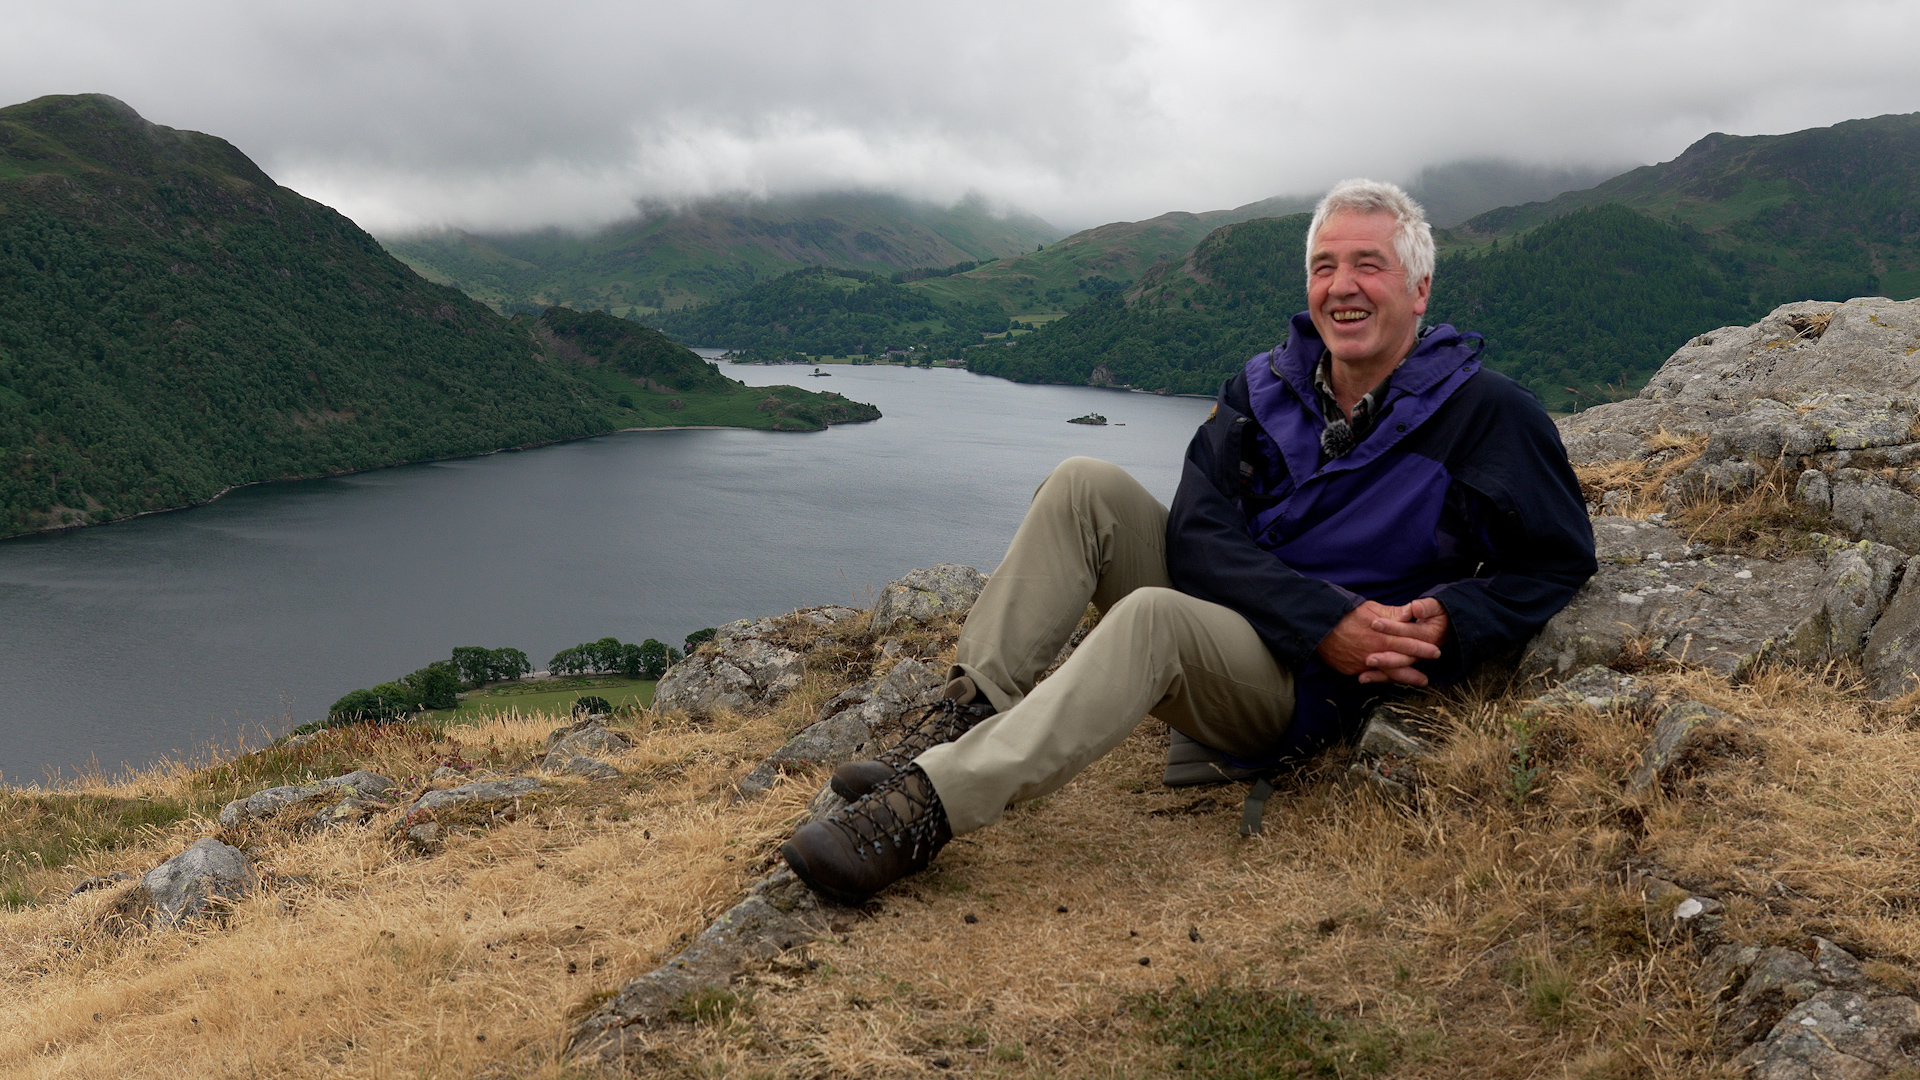 A man sits on a rocky outcrop, with a lake and hills behind him